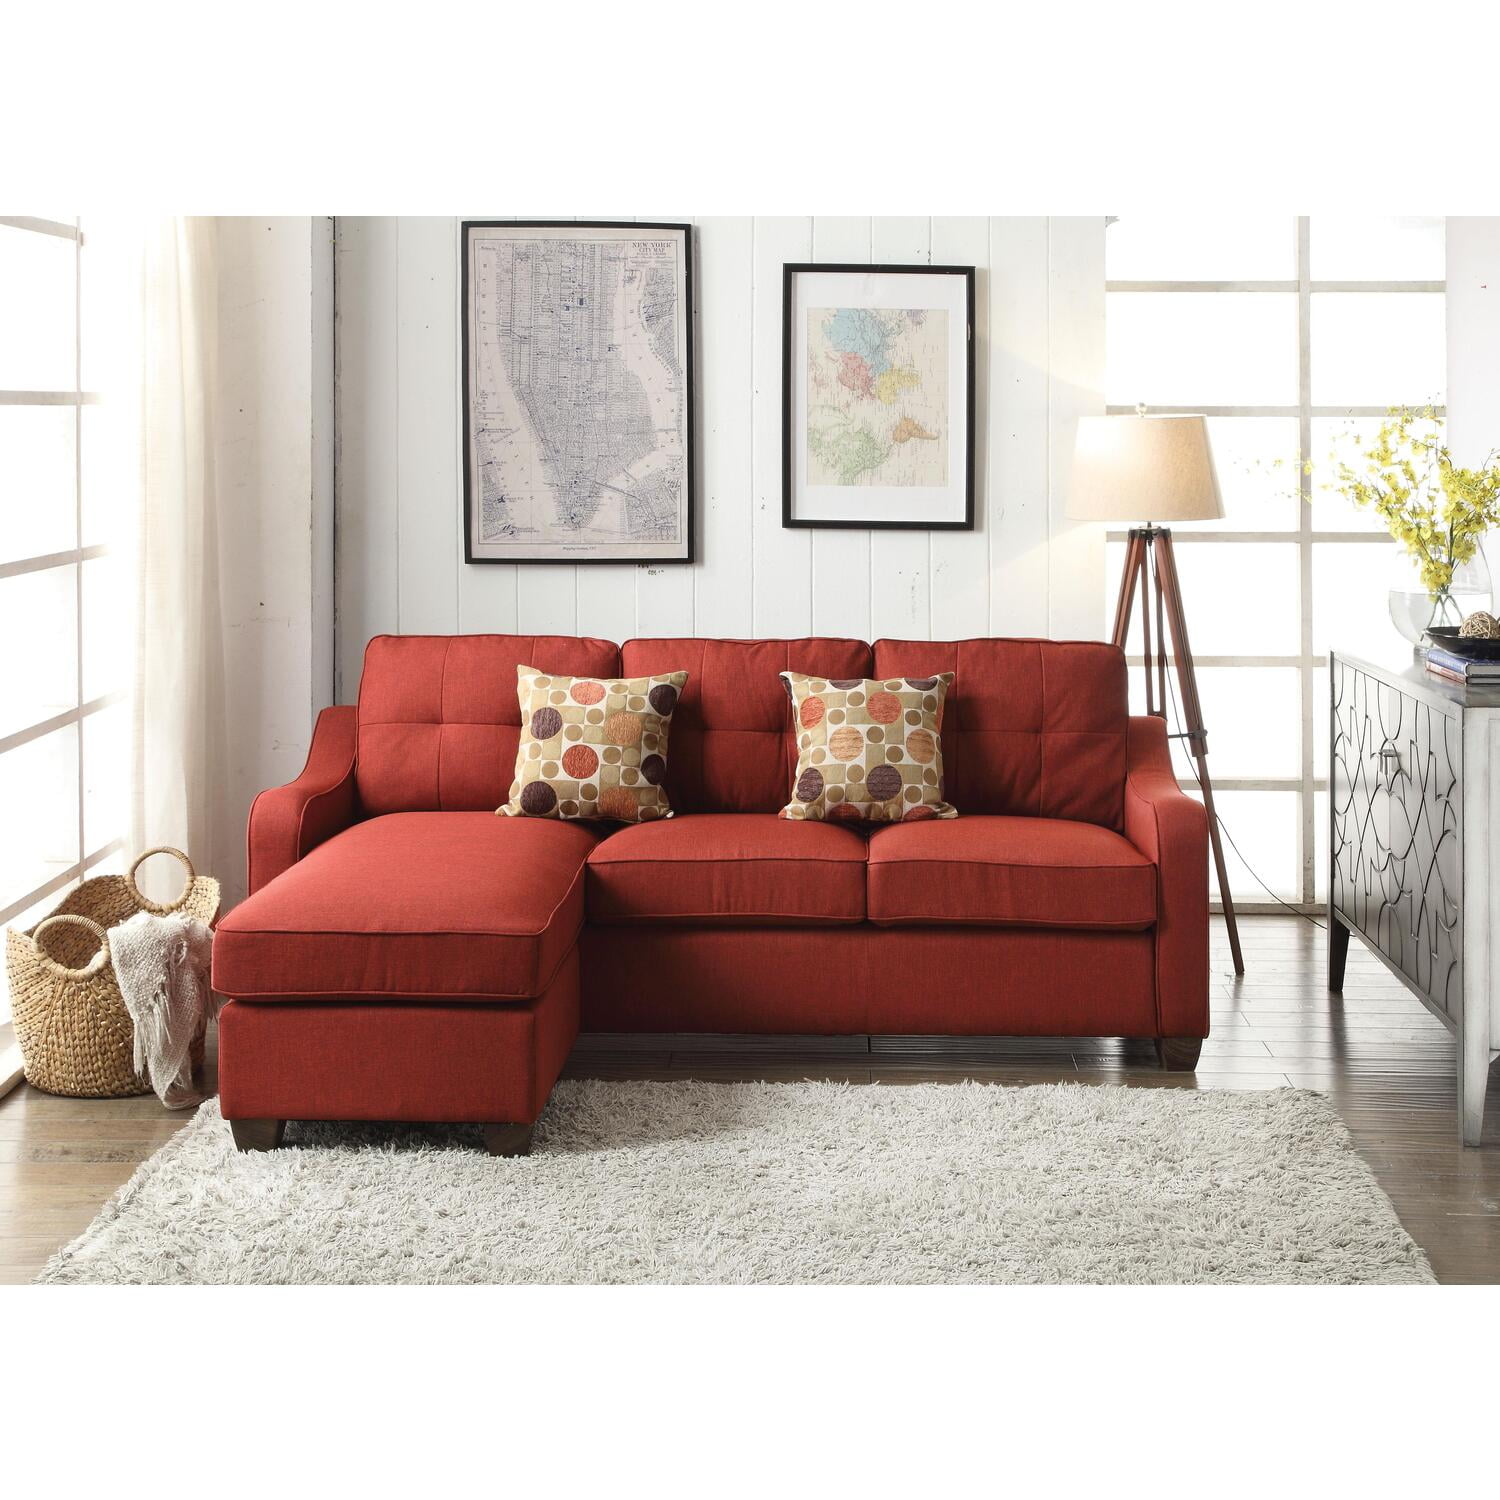 Picture of ACME 53740 Cleavon II Sectional Sofa & 2 Pillows - Red Linen - 35 x 84 x 56 in.